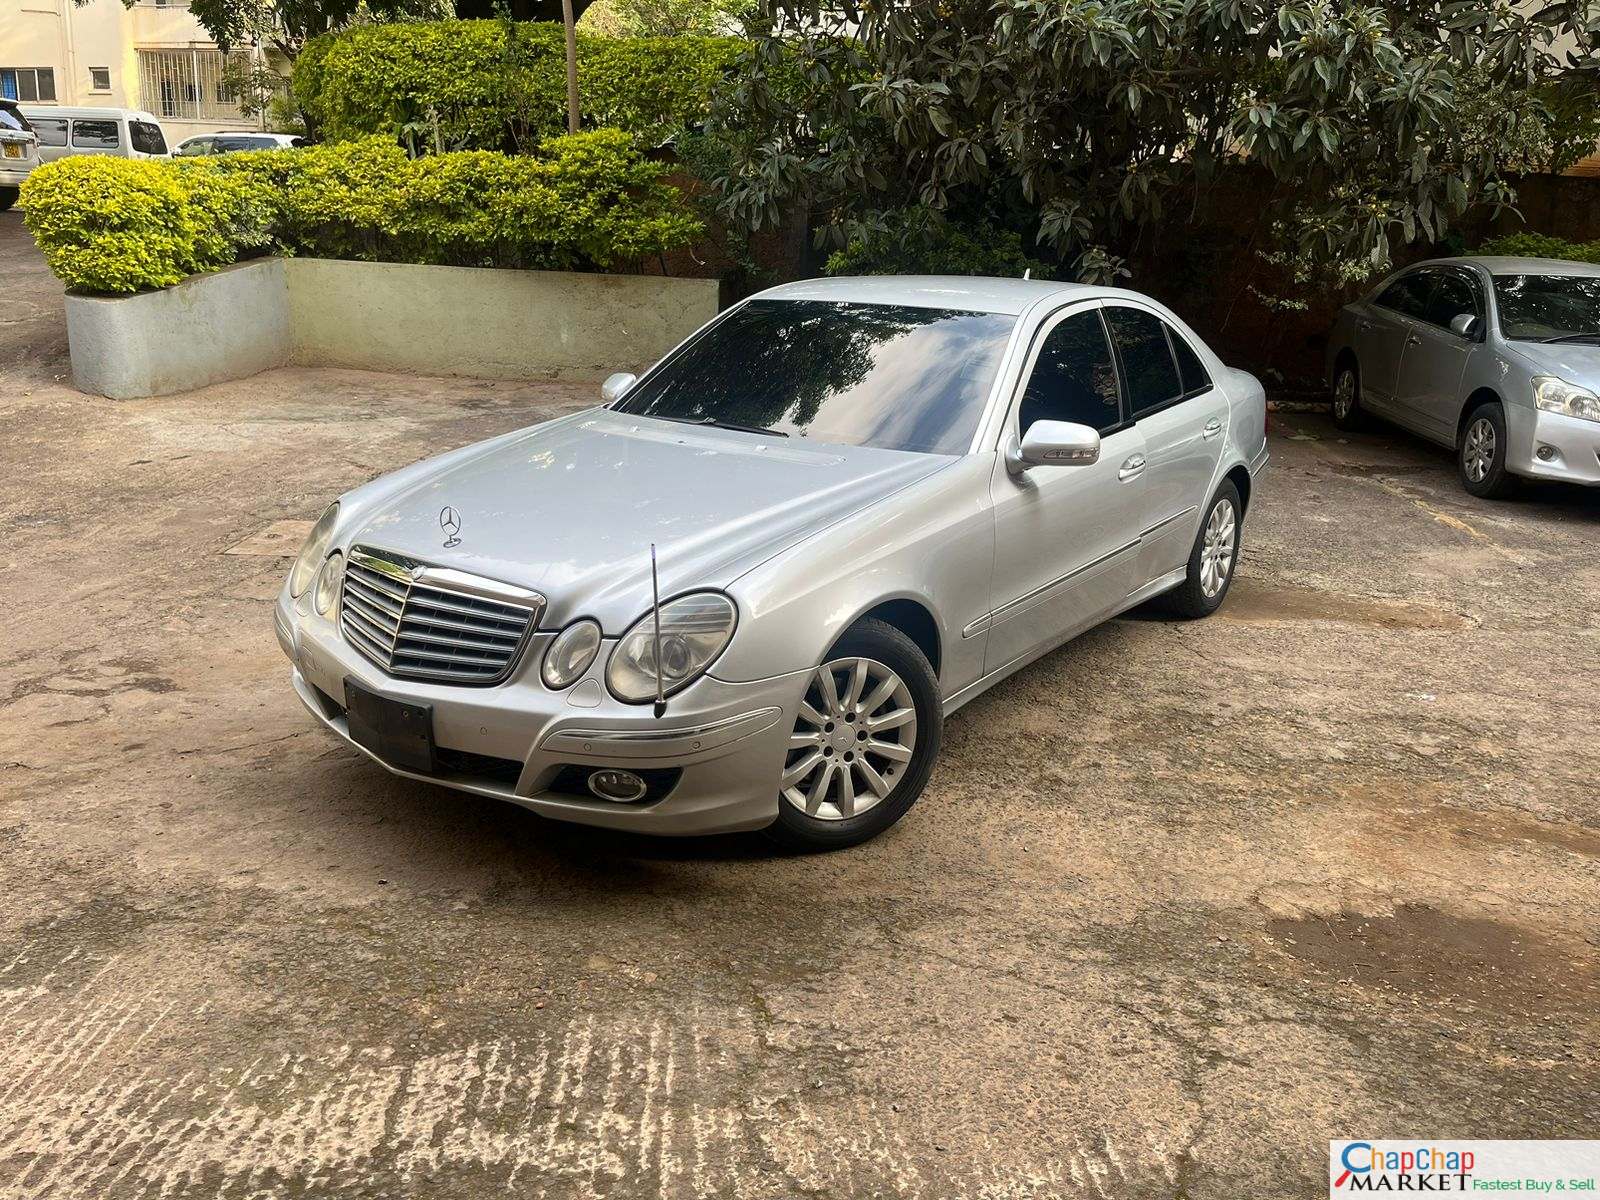 Cars Cars For Sale-Mercedes Benz E300 for sale in kenya You Pay 30% Deposit Trade in OK EXCLUSIVE 9